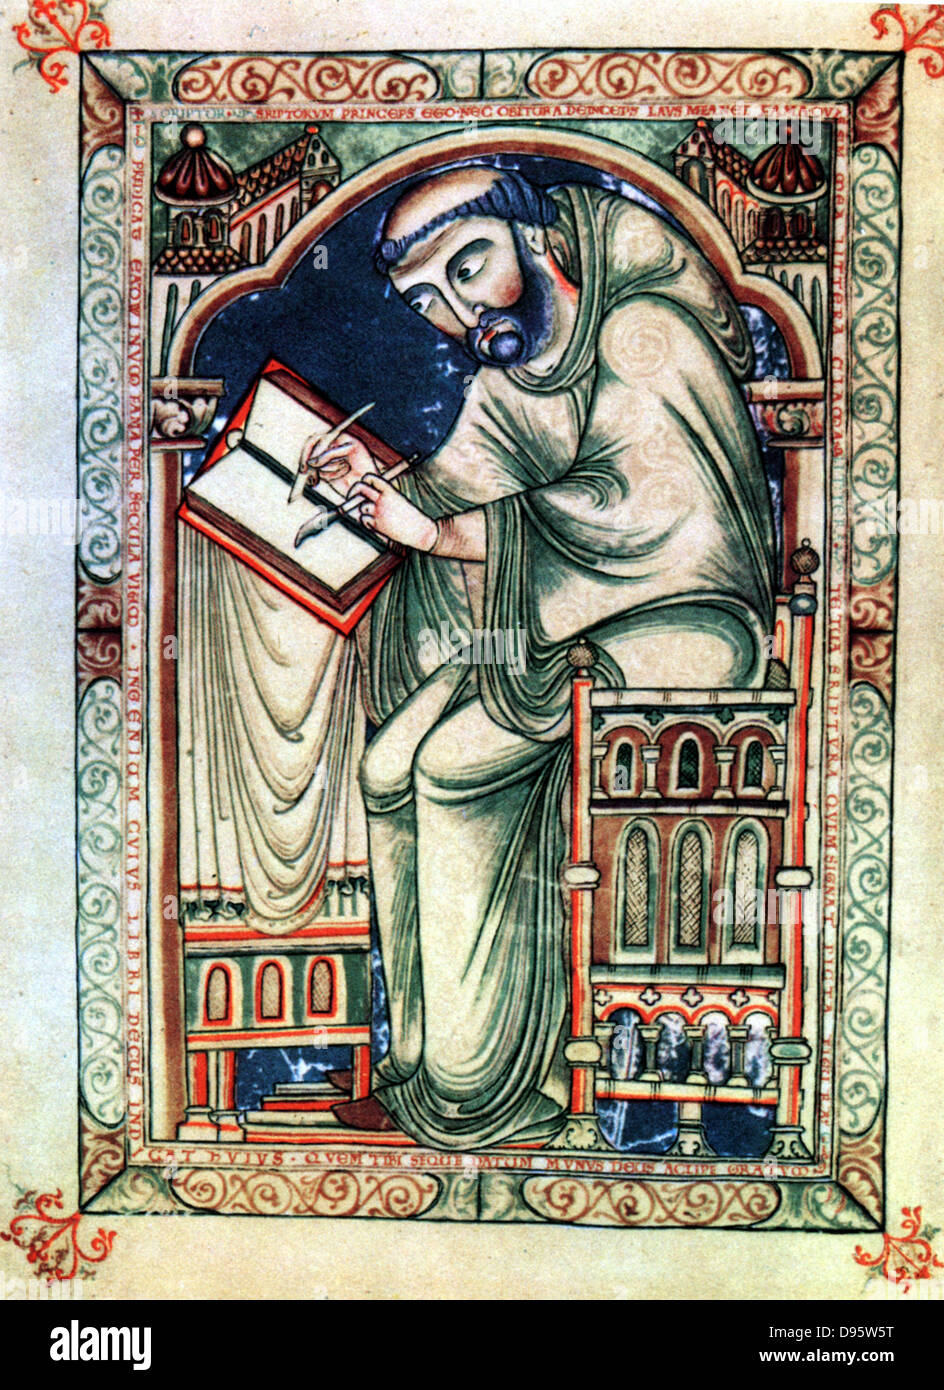 Medieval Occupations and Jobs: Scribe. History of Scribes and Activities